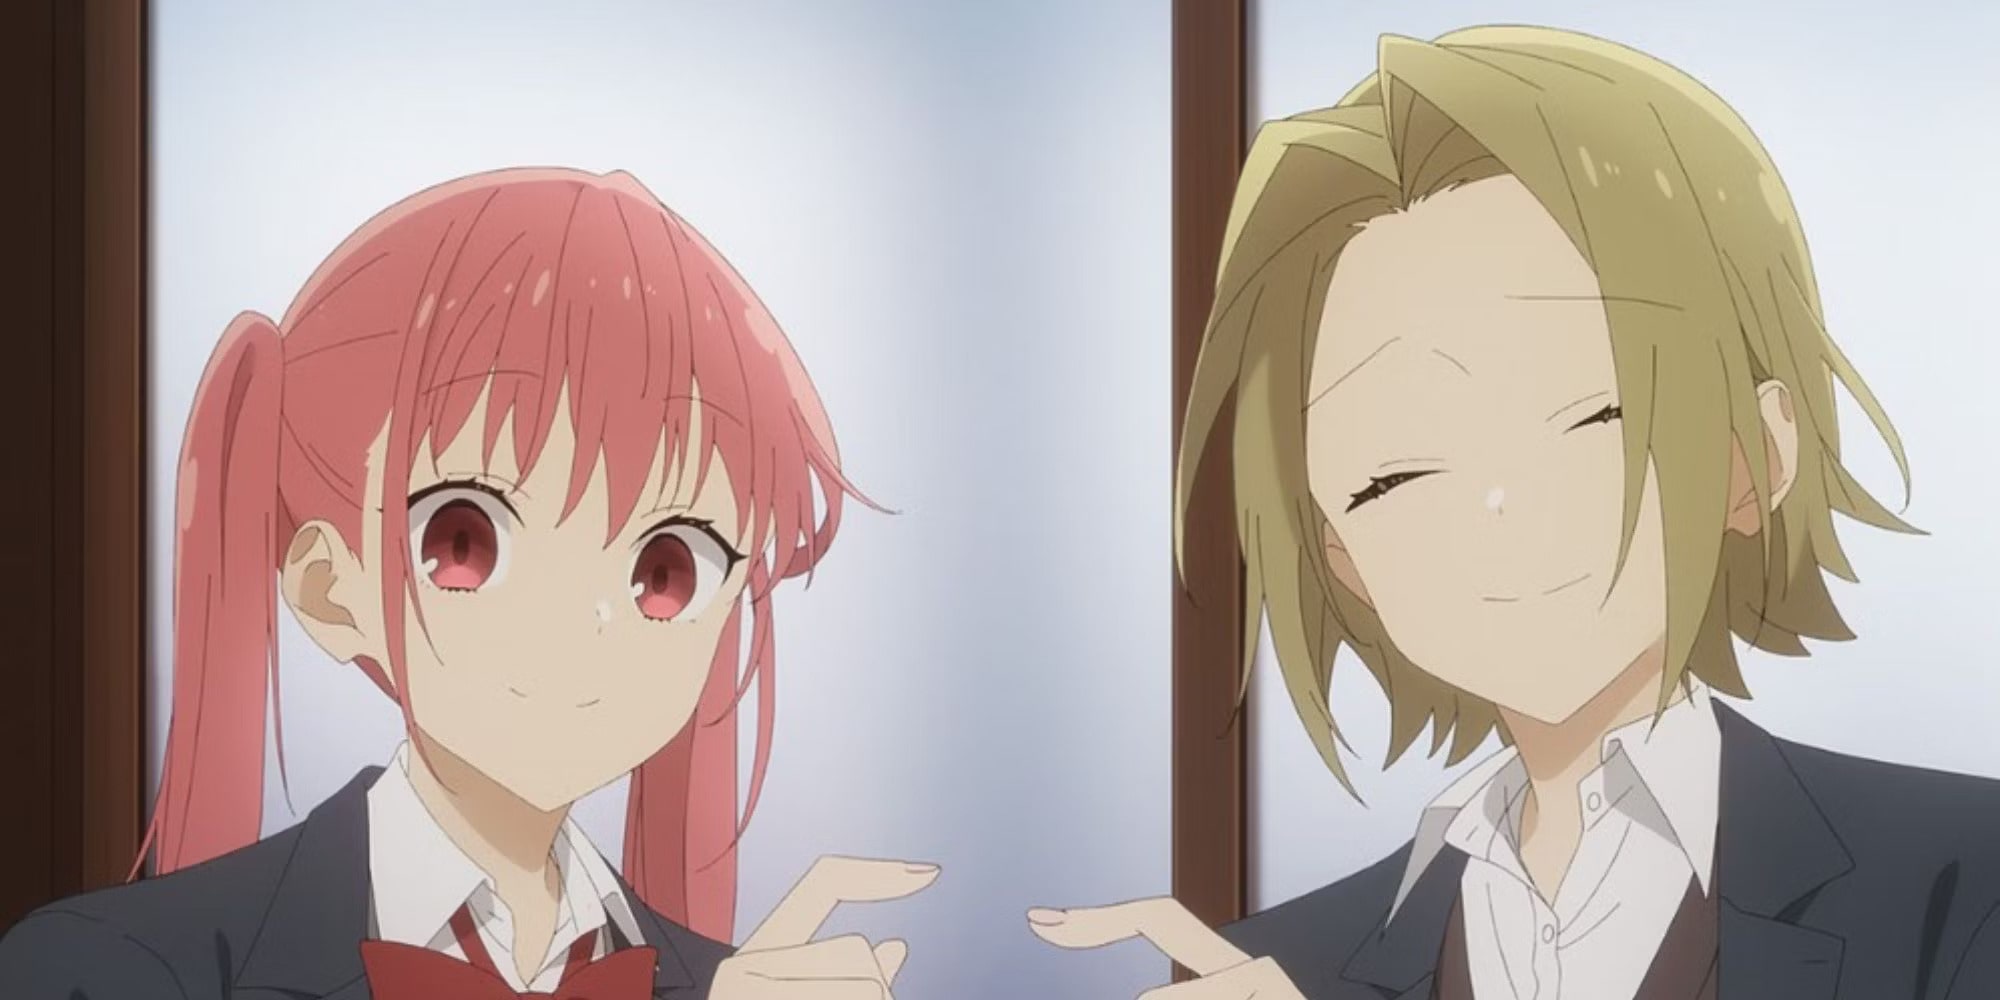 Horimiya -piece- (Season 2) Episode 7 Release Date, Time, Preview Images, and Where to Watch